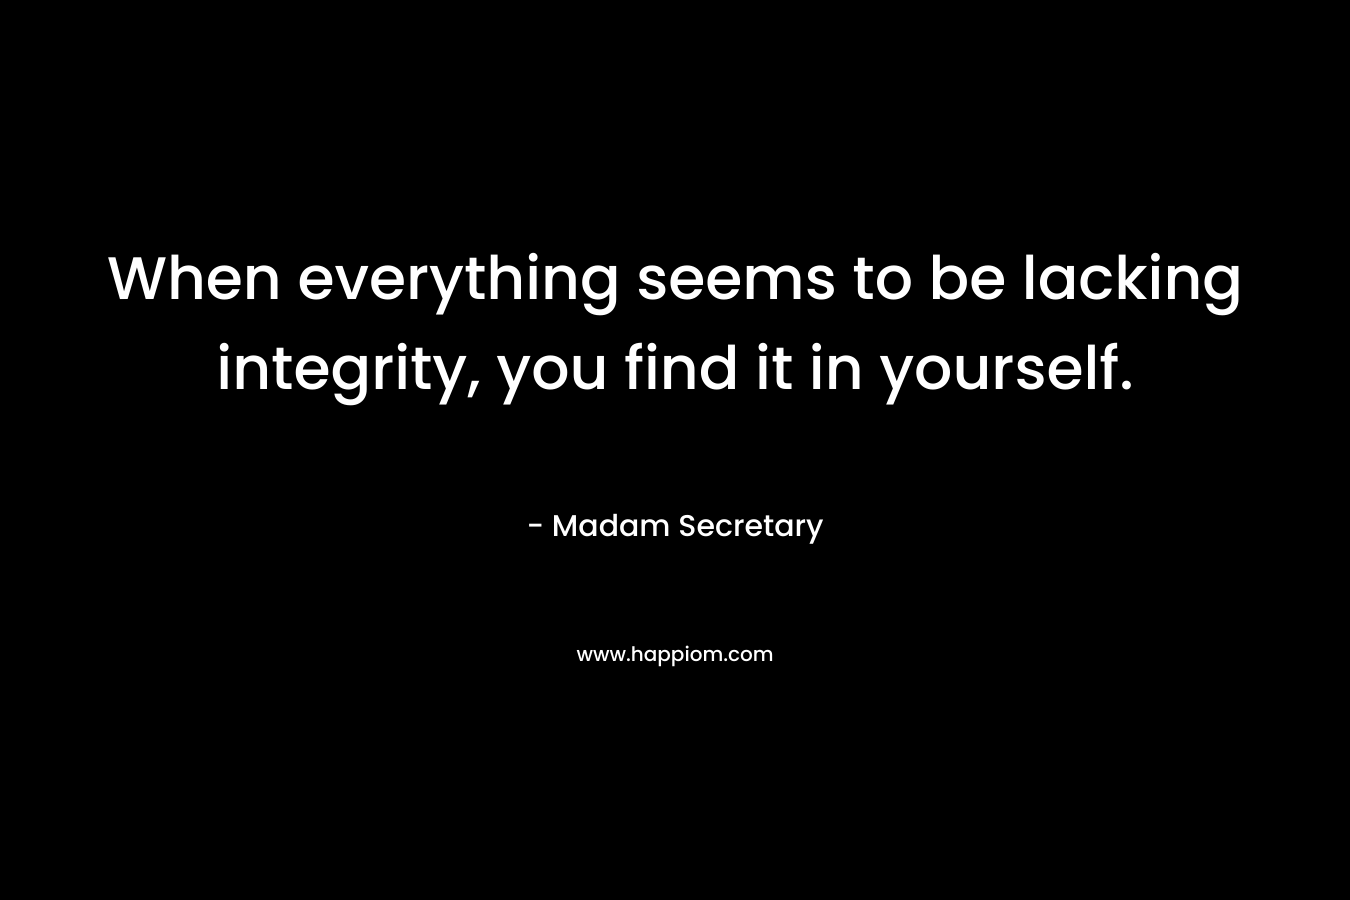 When everything seems to be lacking integrity, you find it in yourself.